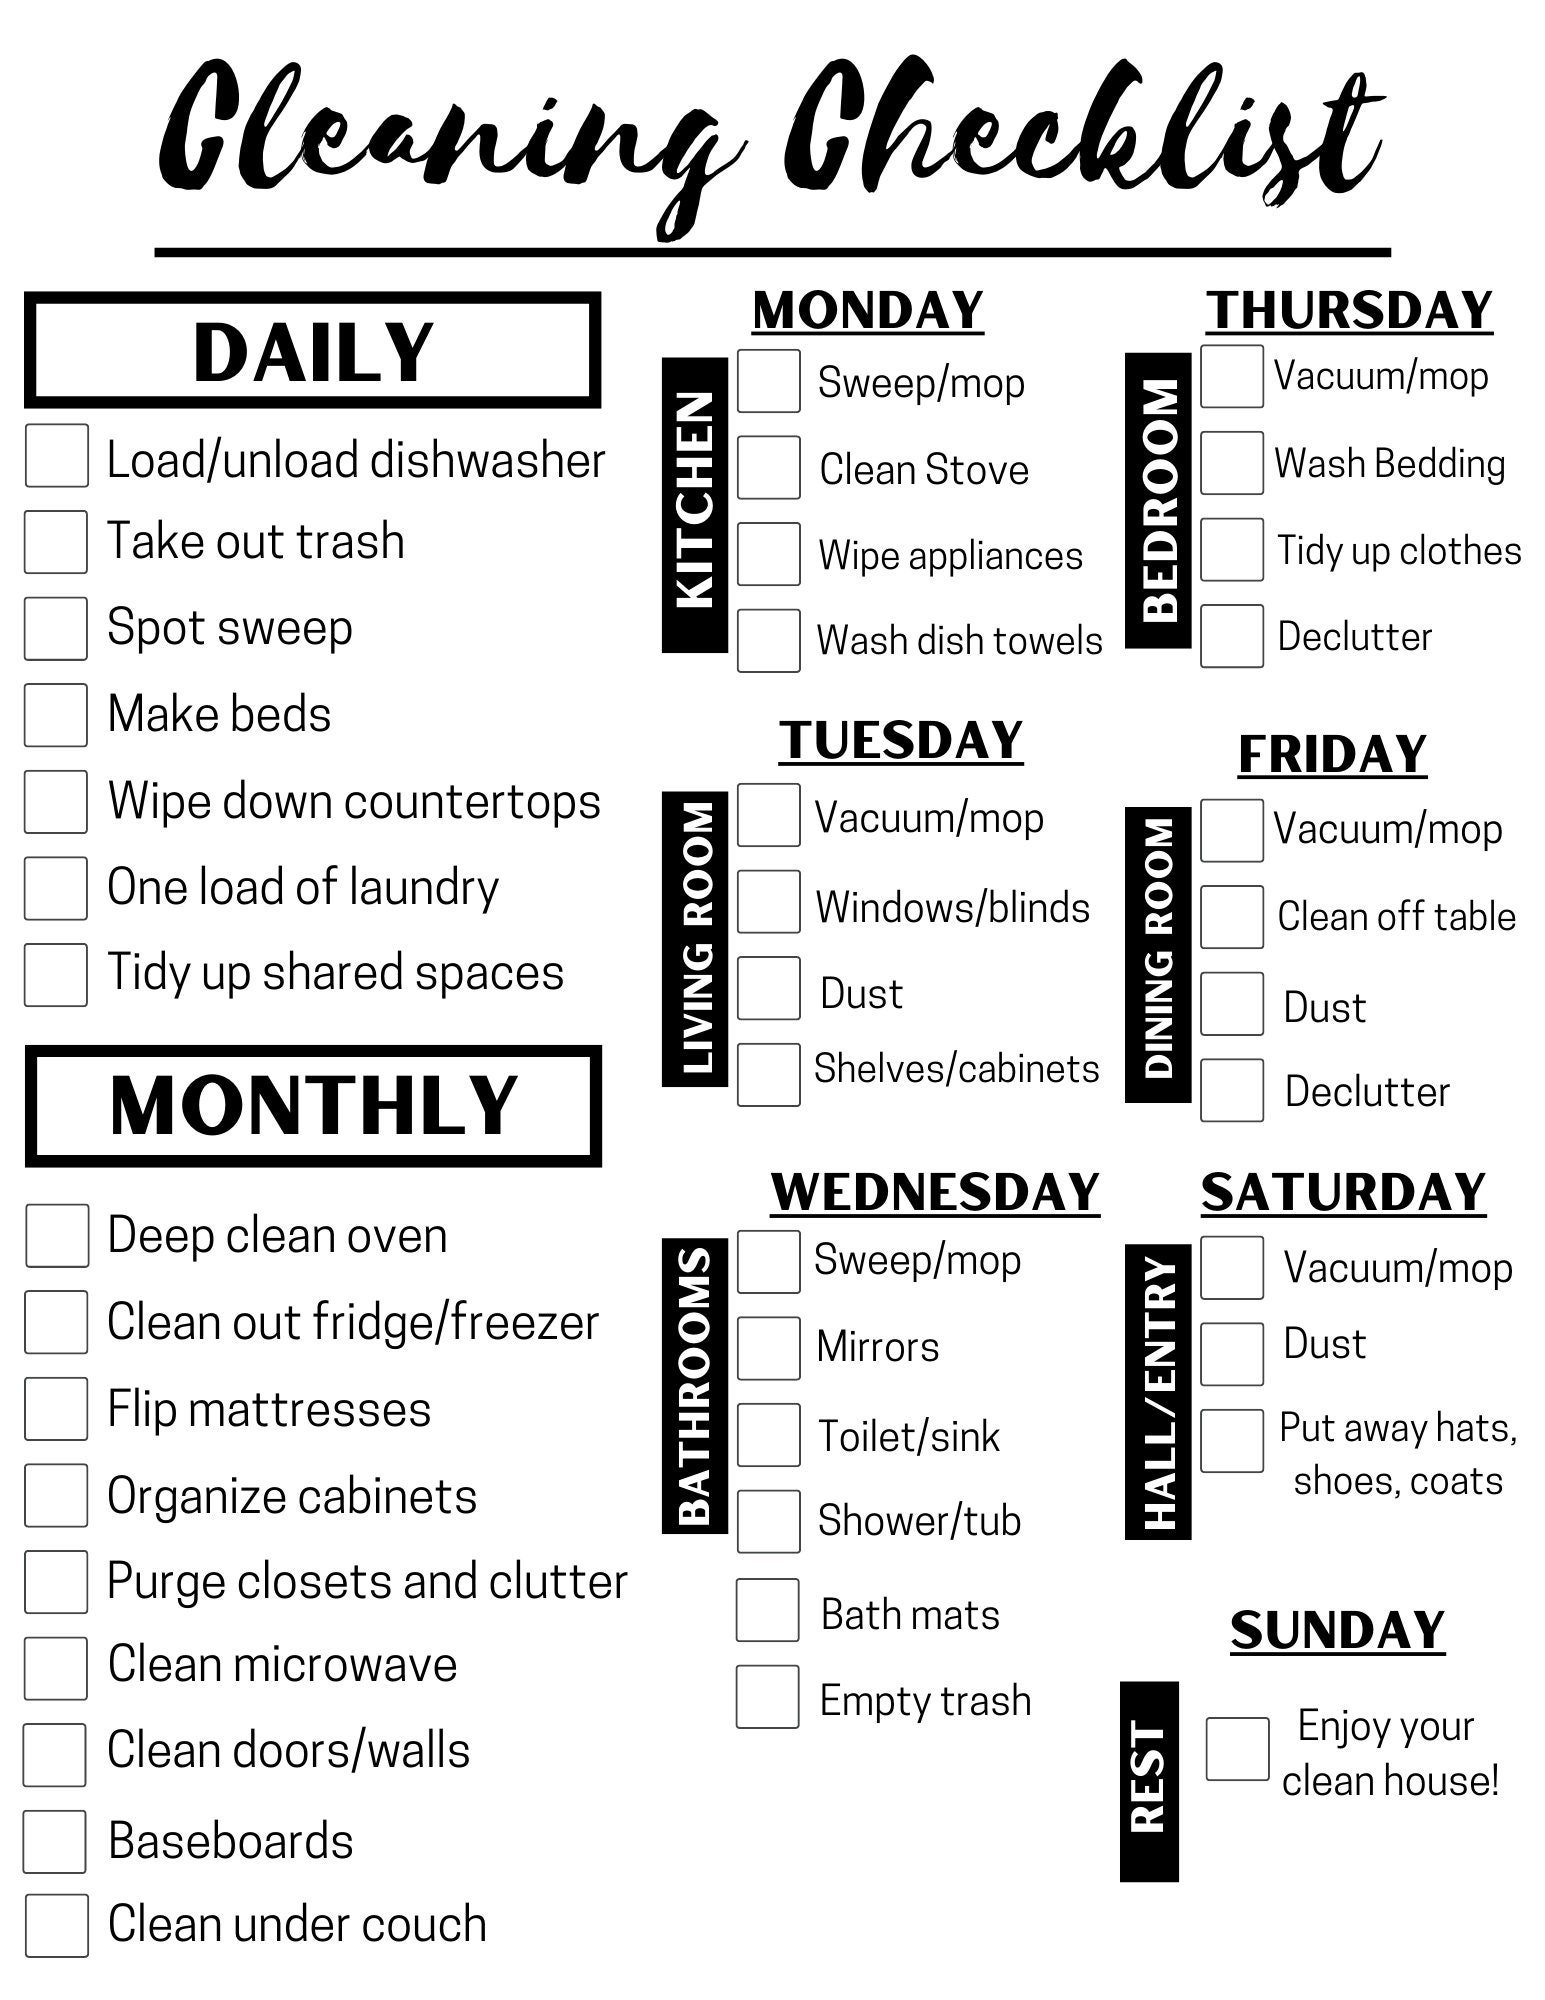 daily-weekly-monthly-cleaning-checklist-schedule-to-do-list-check-off